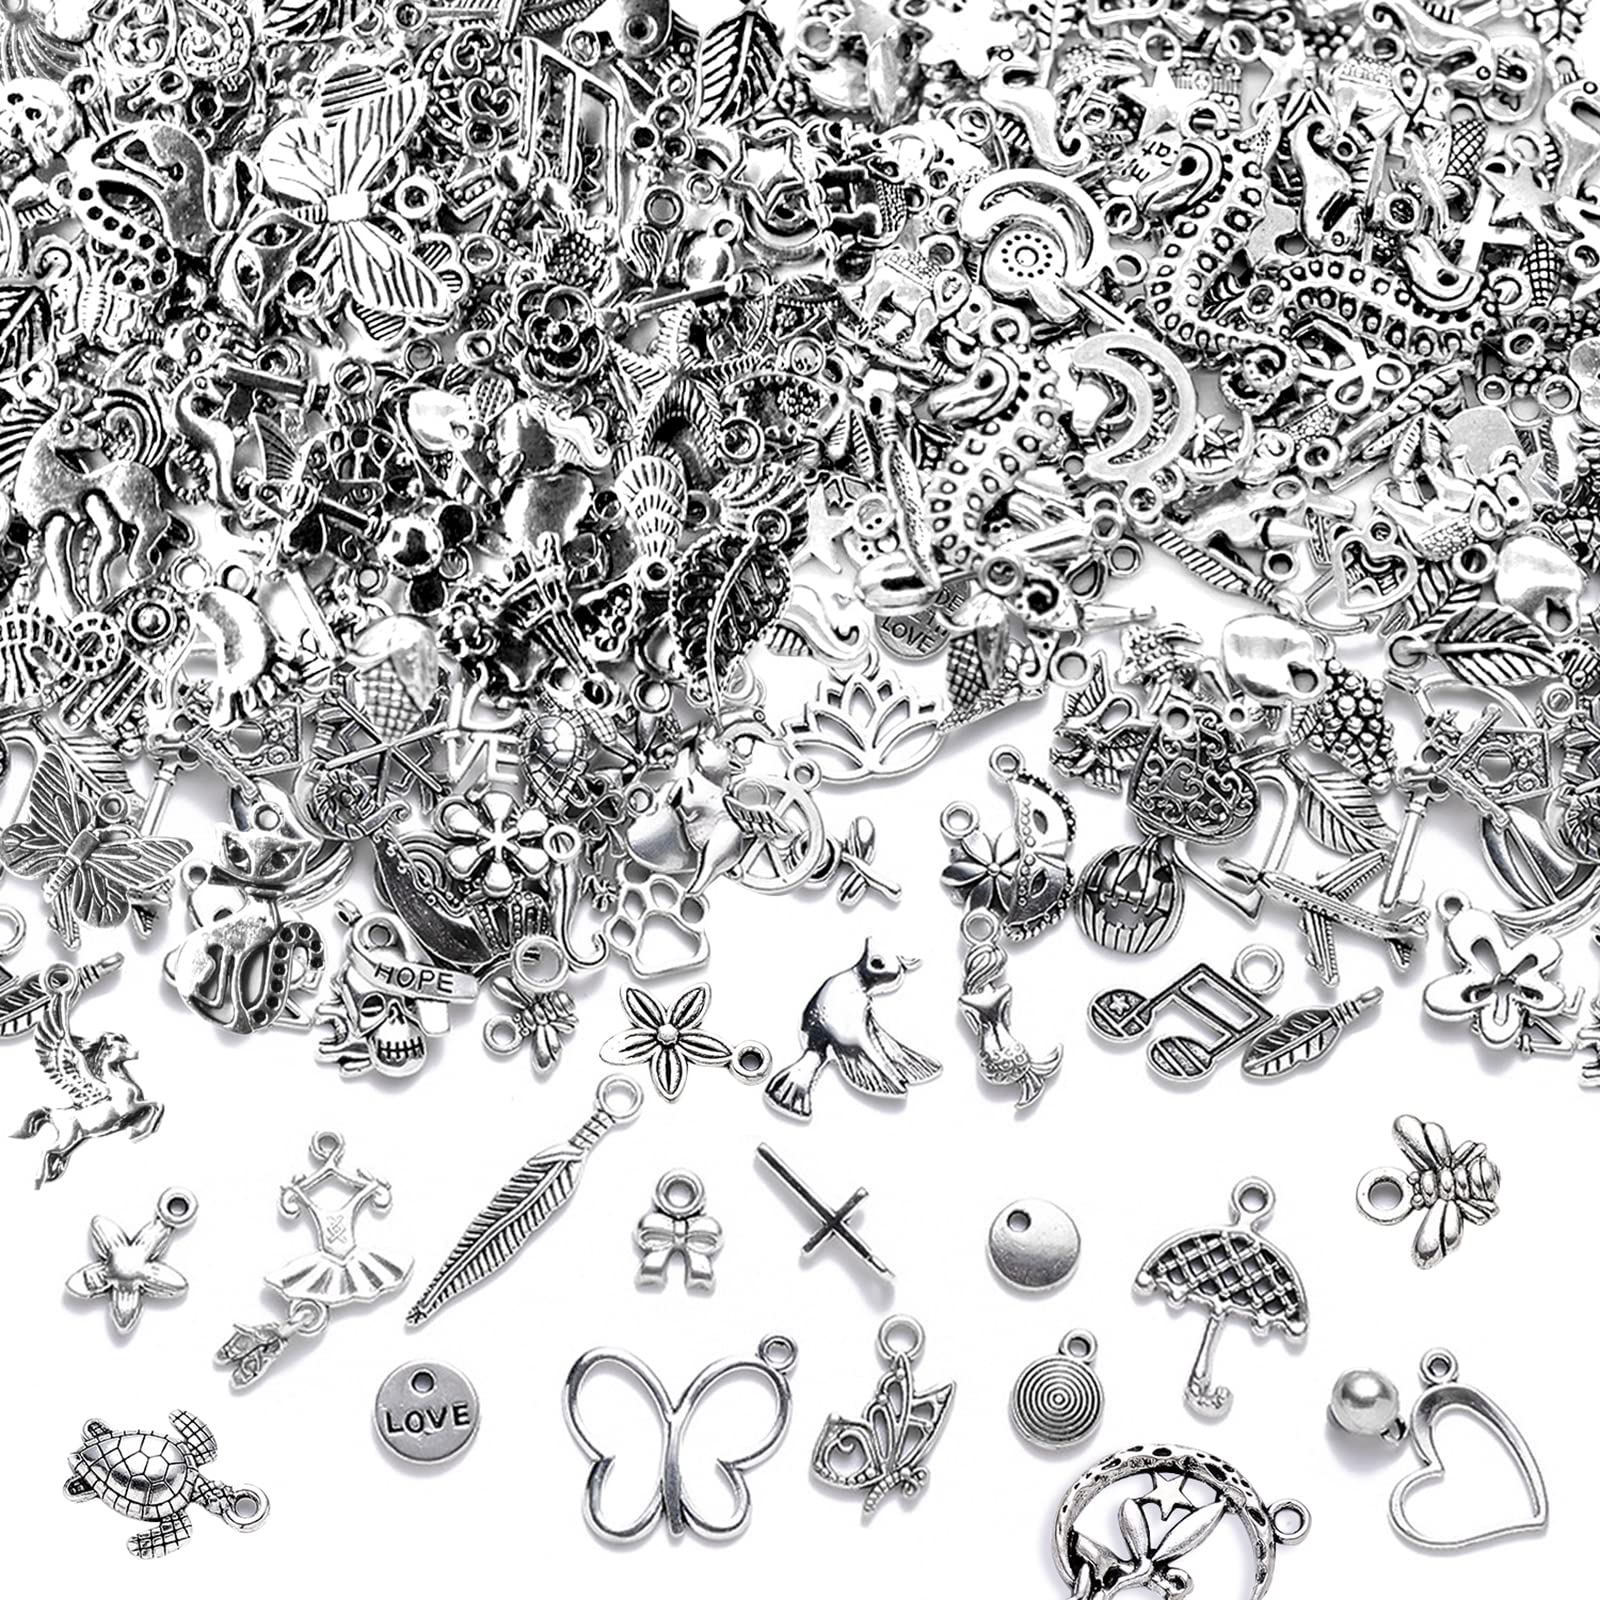 NEPAK 400PCS Wholesale Bulk Lots Jewelry Making Silver Charms Tibetan  Silver Metal Charms Pendants DIY for Bracelet Necklace Jewelry Making and  Crafting